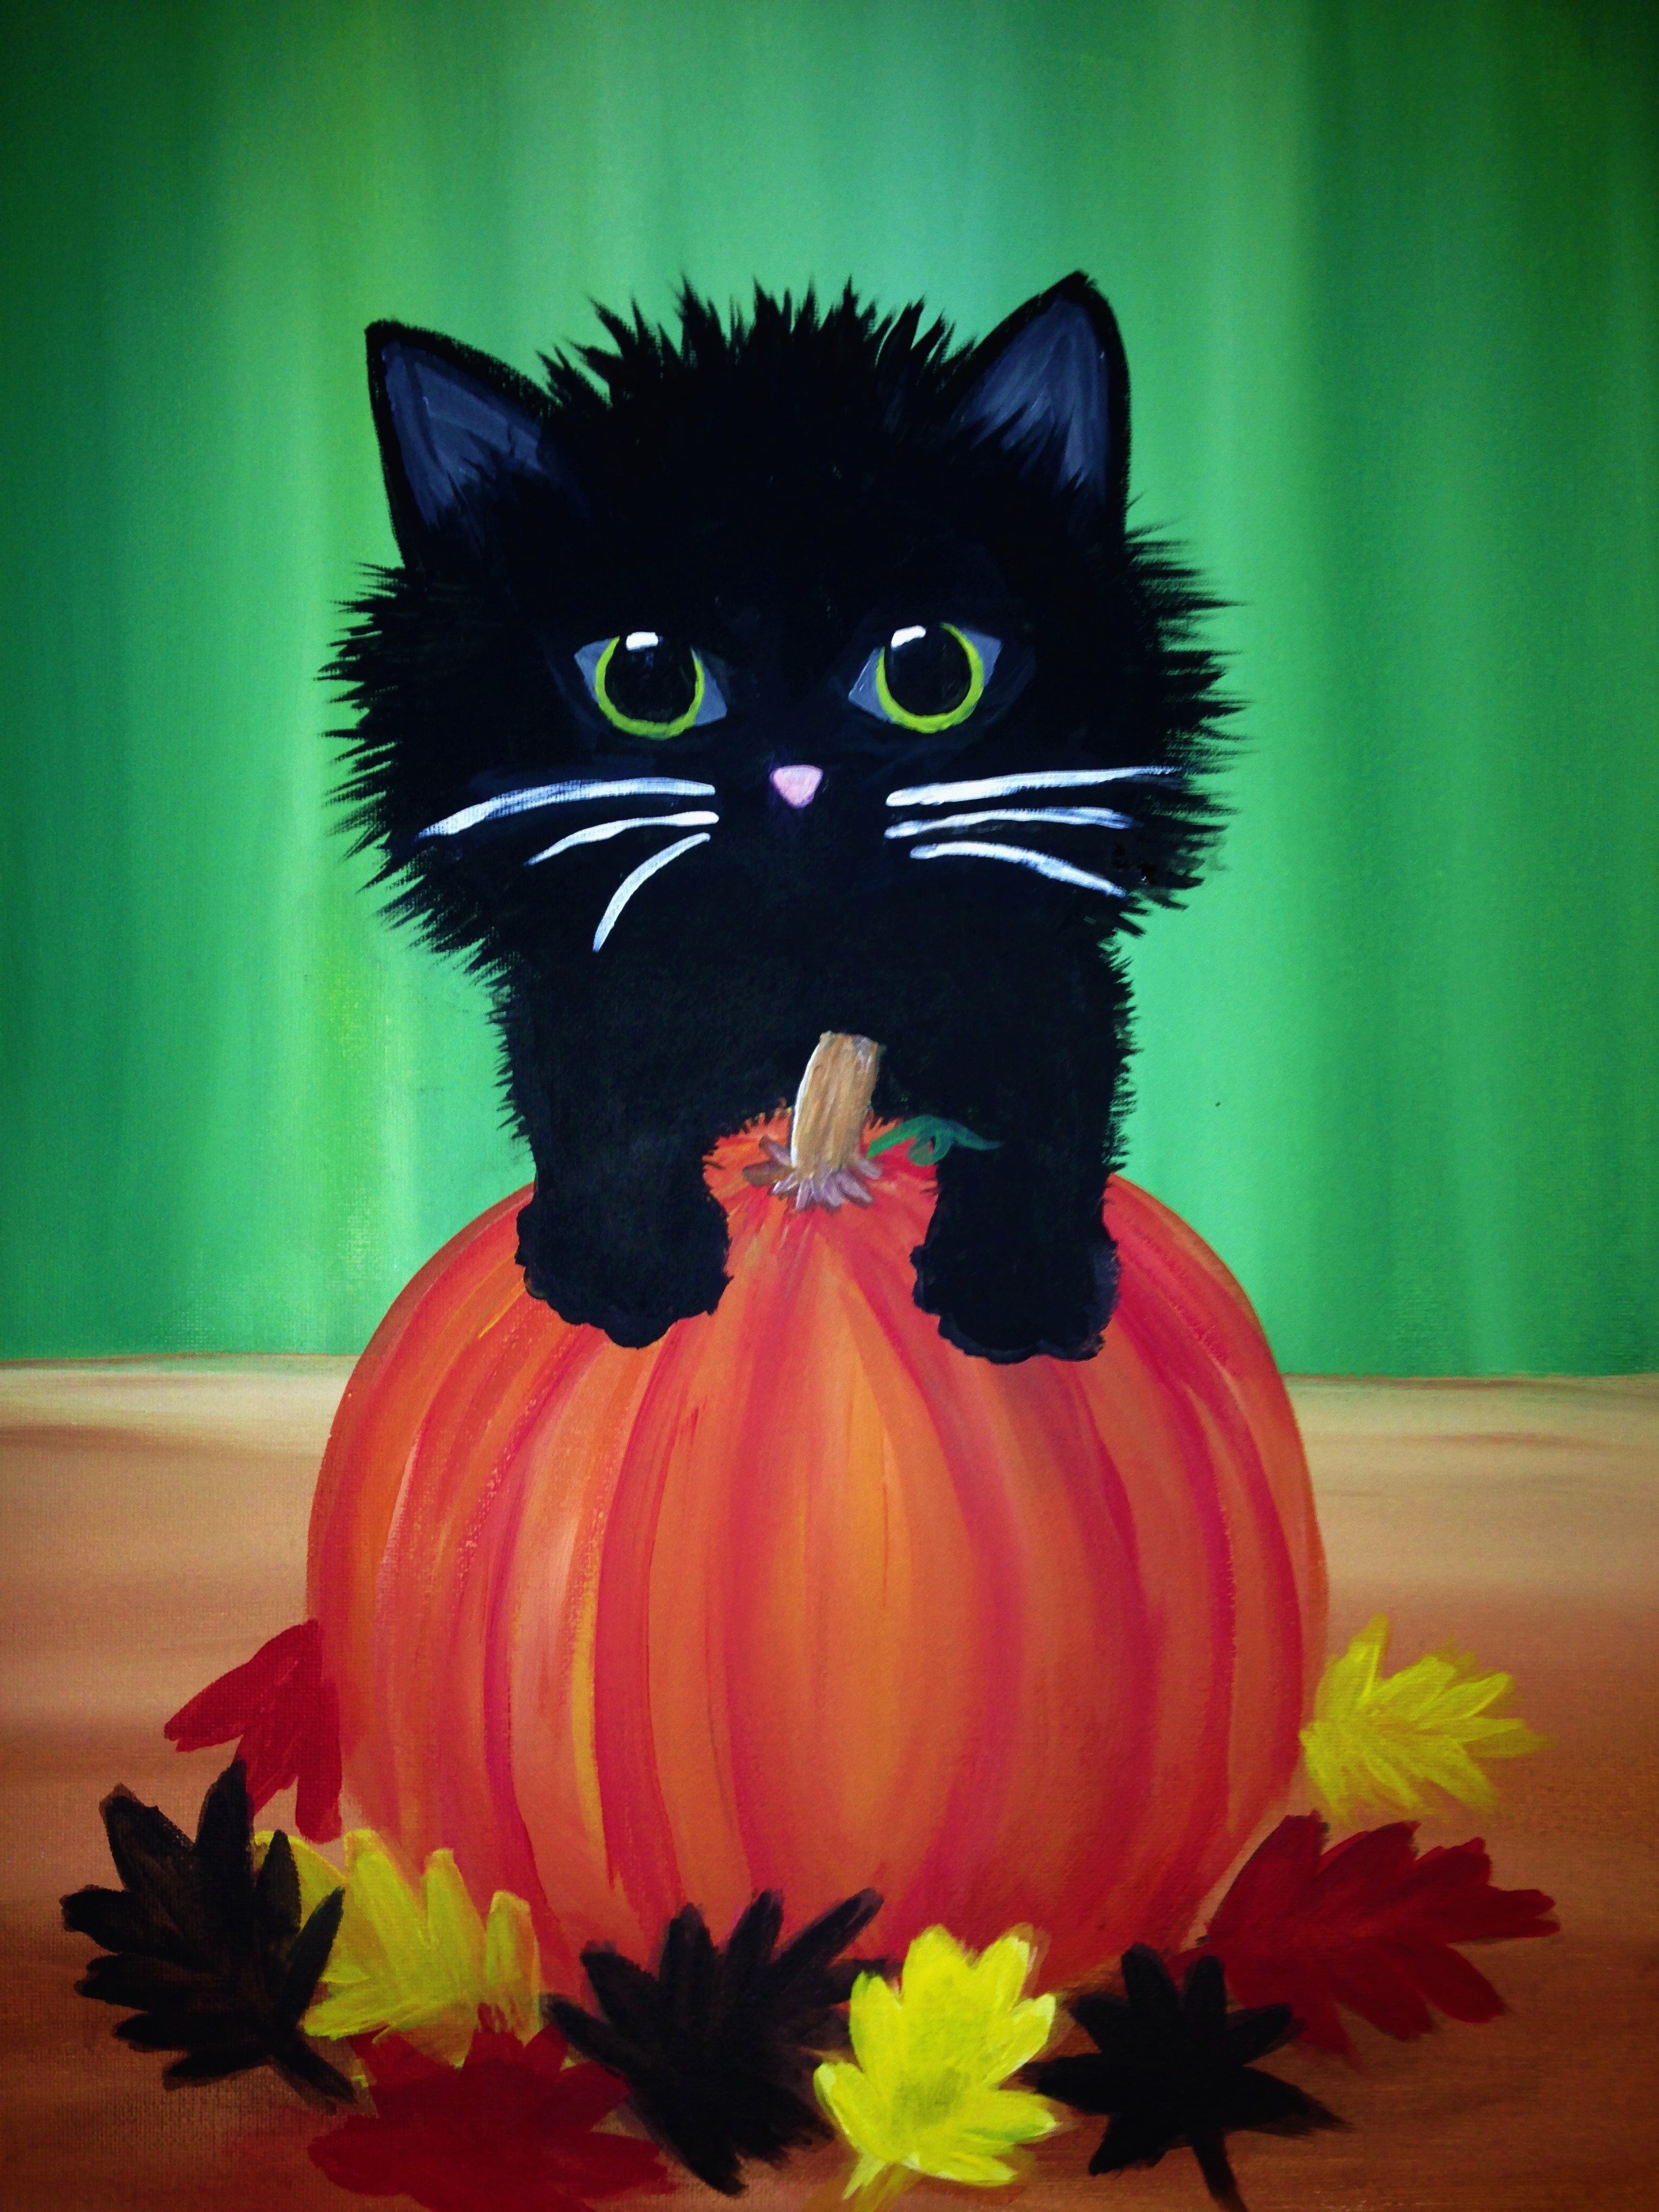 A Beautifall Kitten paint nite project by Yaymaker